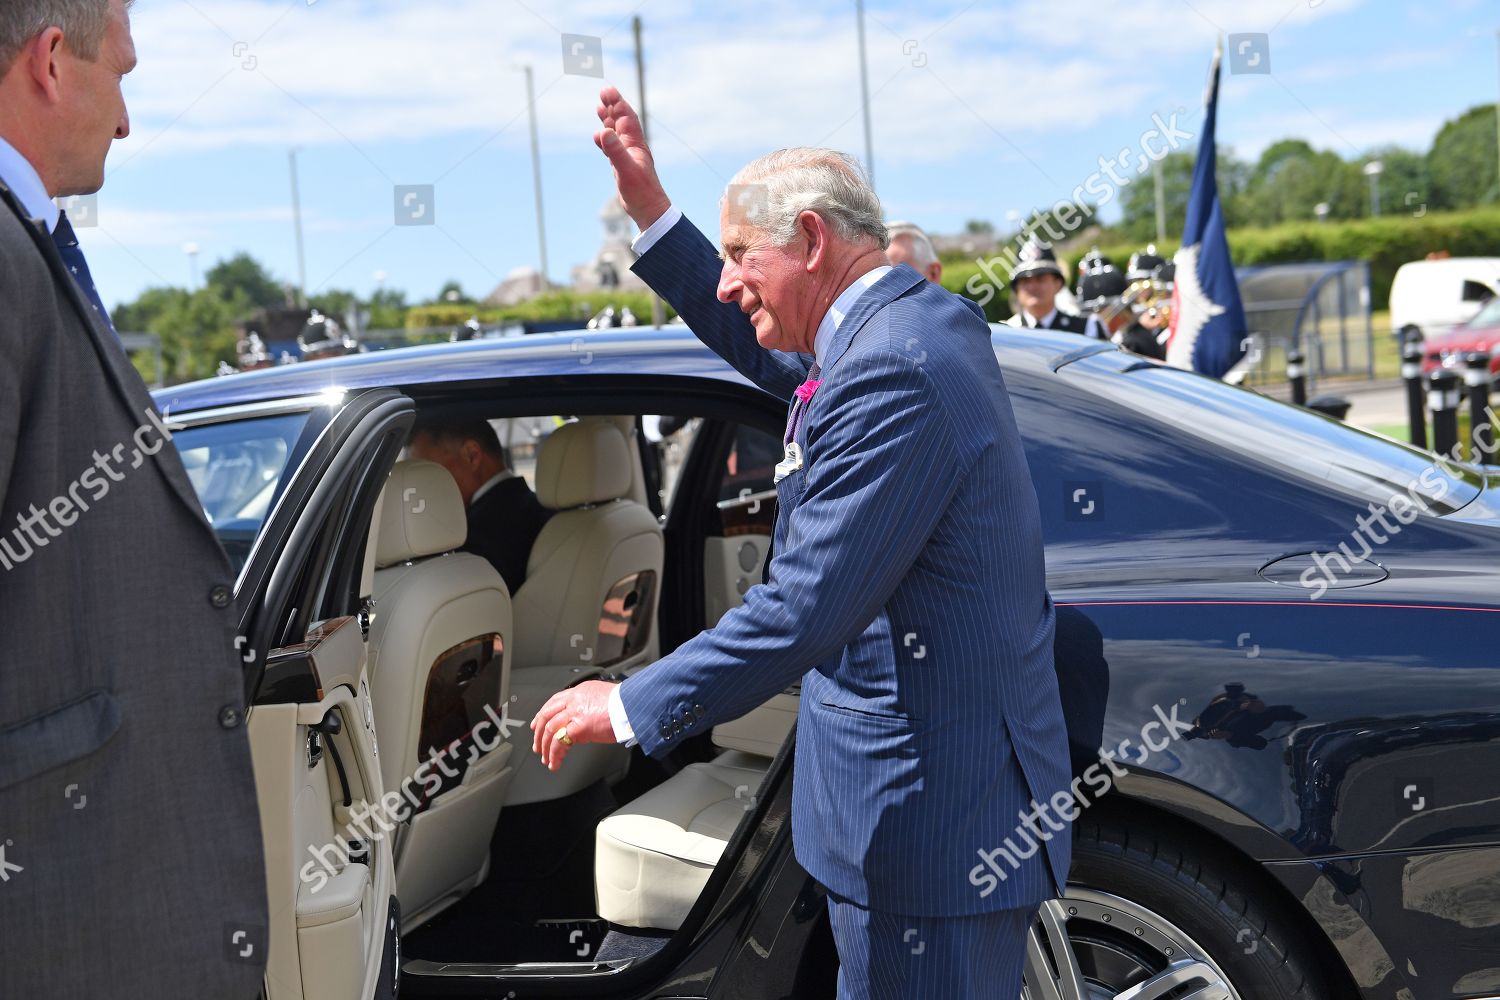 prince-charles-visit-to-wales-uk-shutterstock-editorial-10326139x.jpg